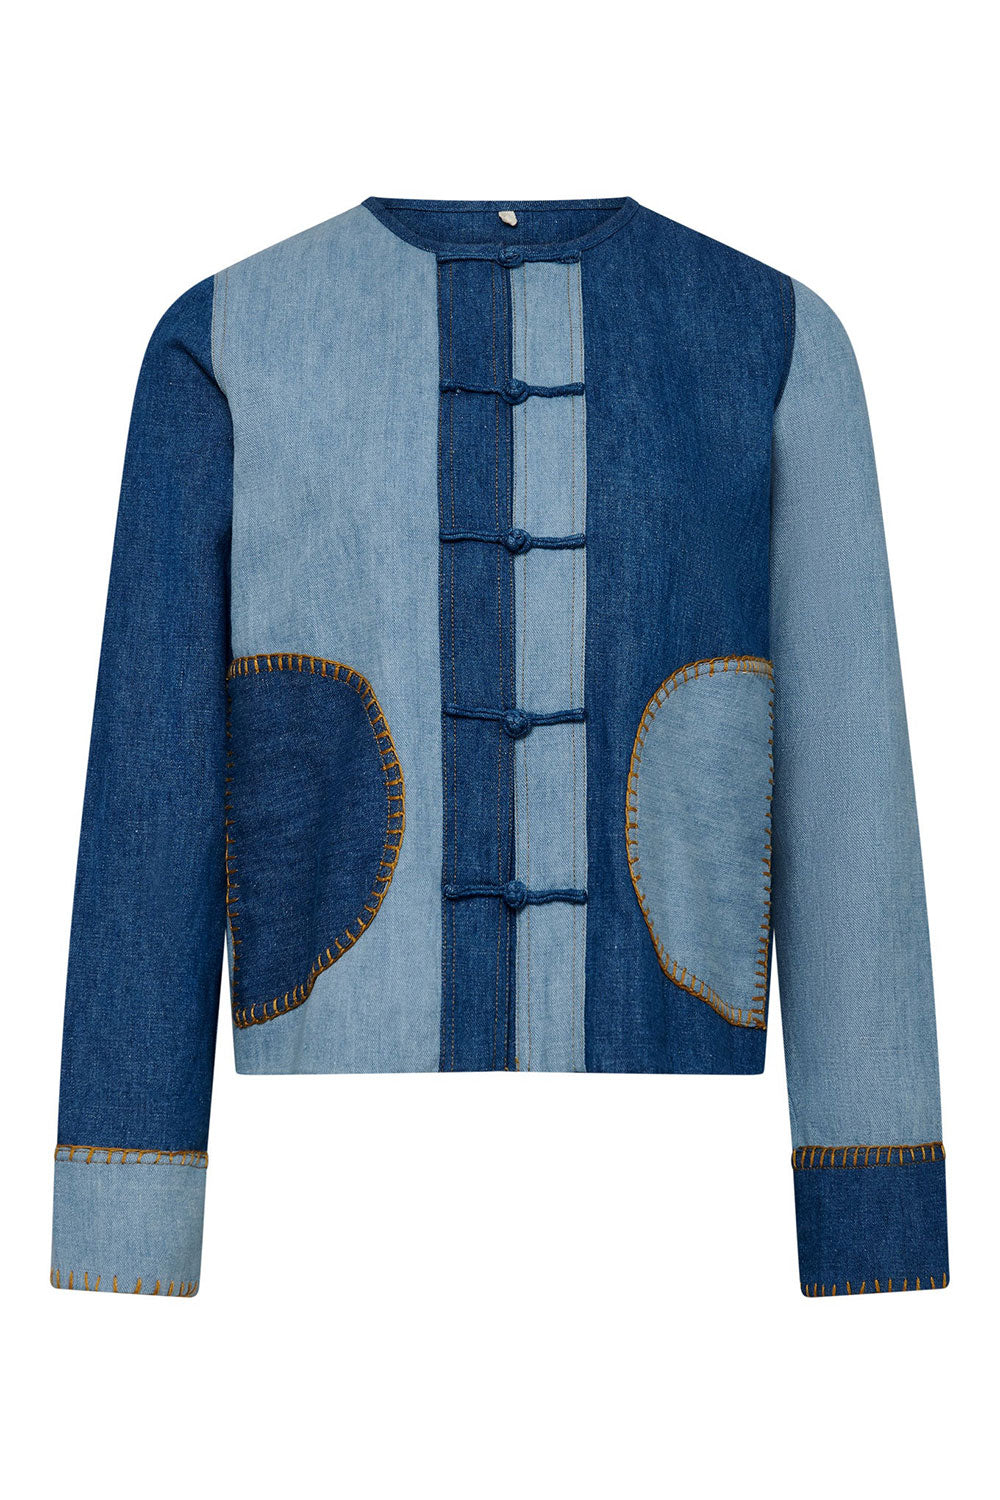 Nelly Patchwork Jacket